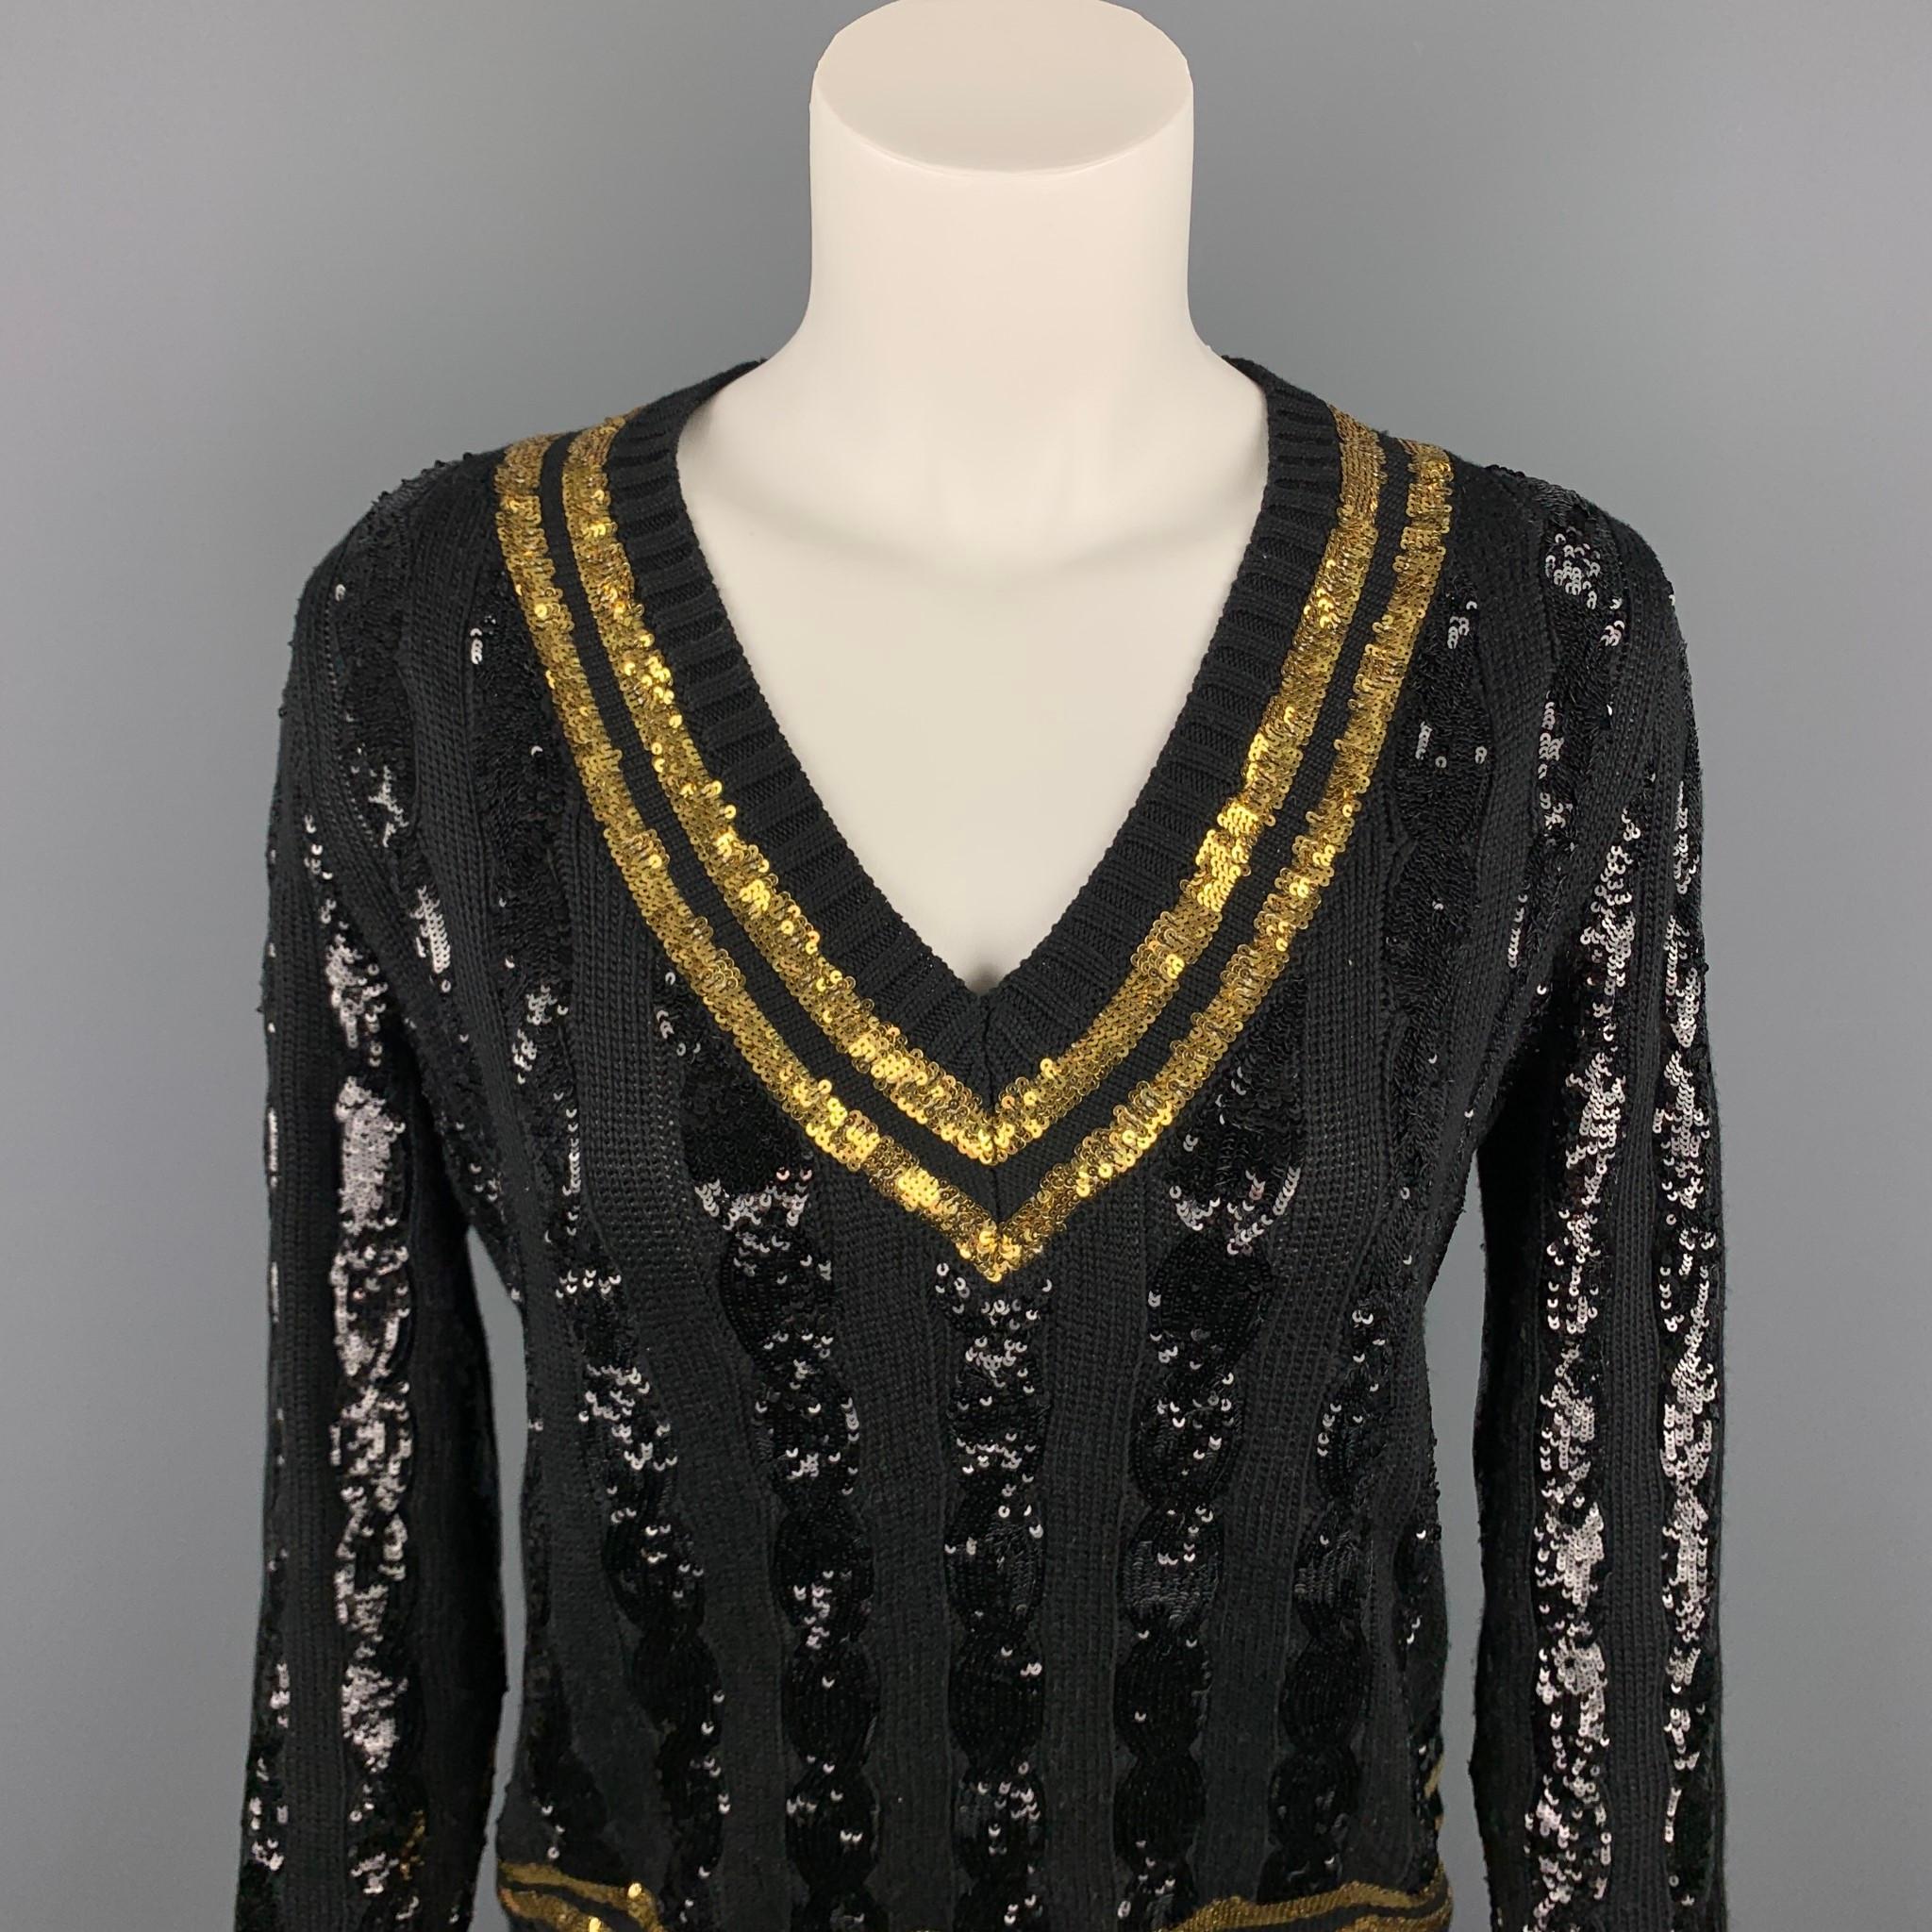 RALPH LAUREN Collection sweater comes in a black & gold stripe sequined silk featuring a v-neck.

Very Good Pre-Owned Condition.
Marked: M

Measurements:

Shoulder: 16 in.
Bust: 38 in.
Sleeve: 25 in.
Length: 23 in. 